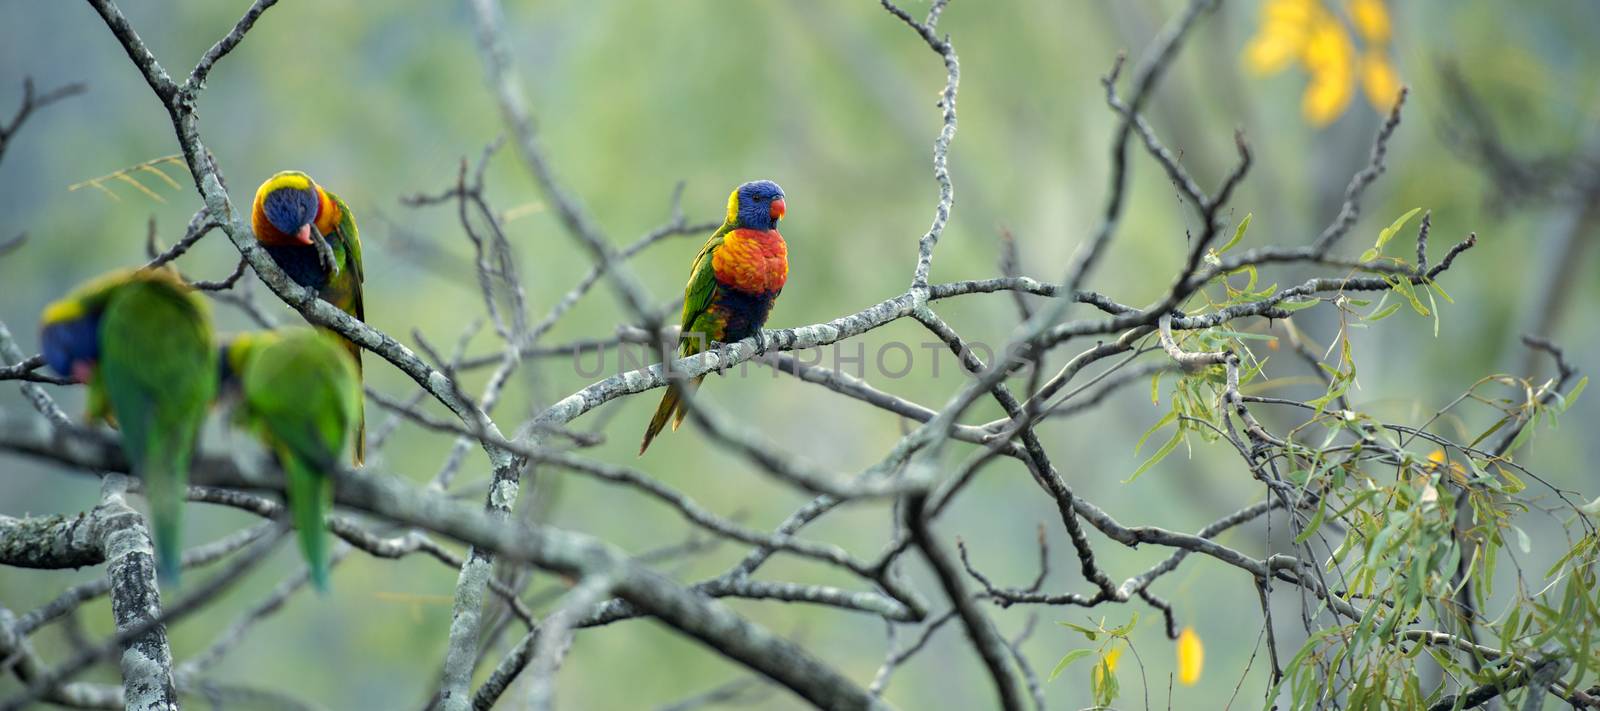 Rainbow lorikeets out in nature during the day, Queensland.